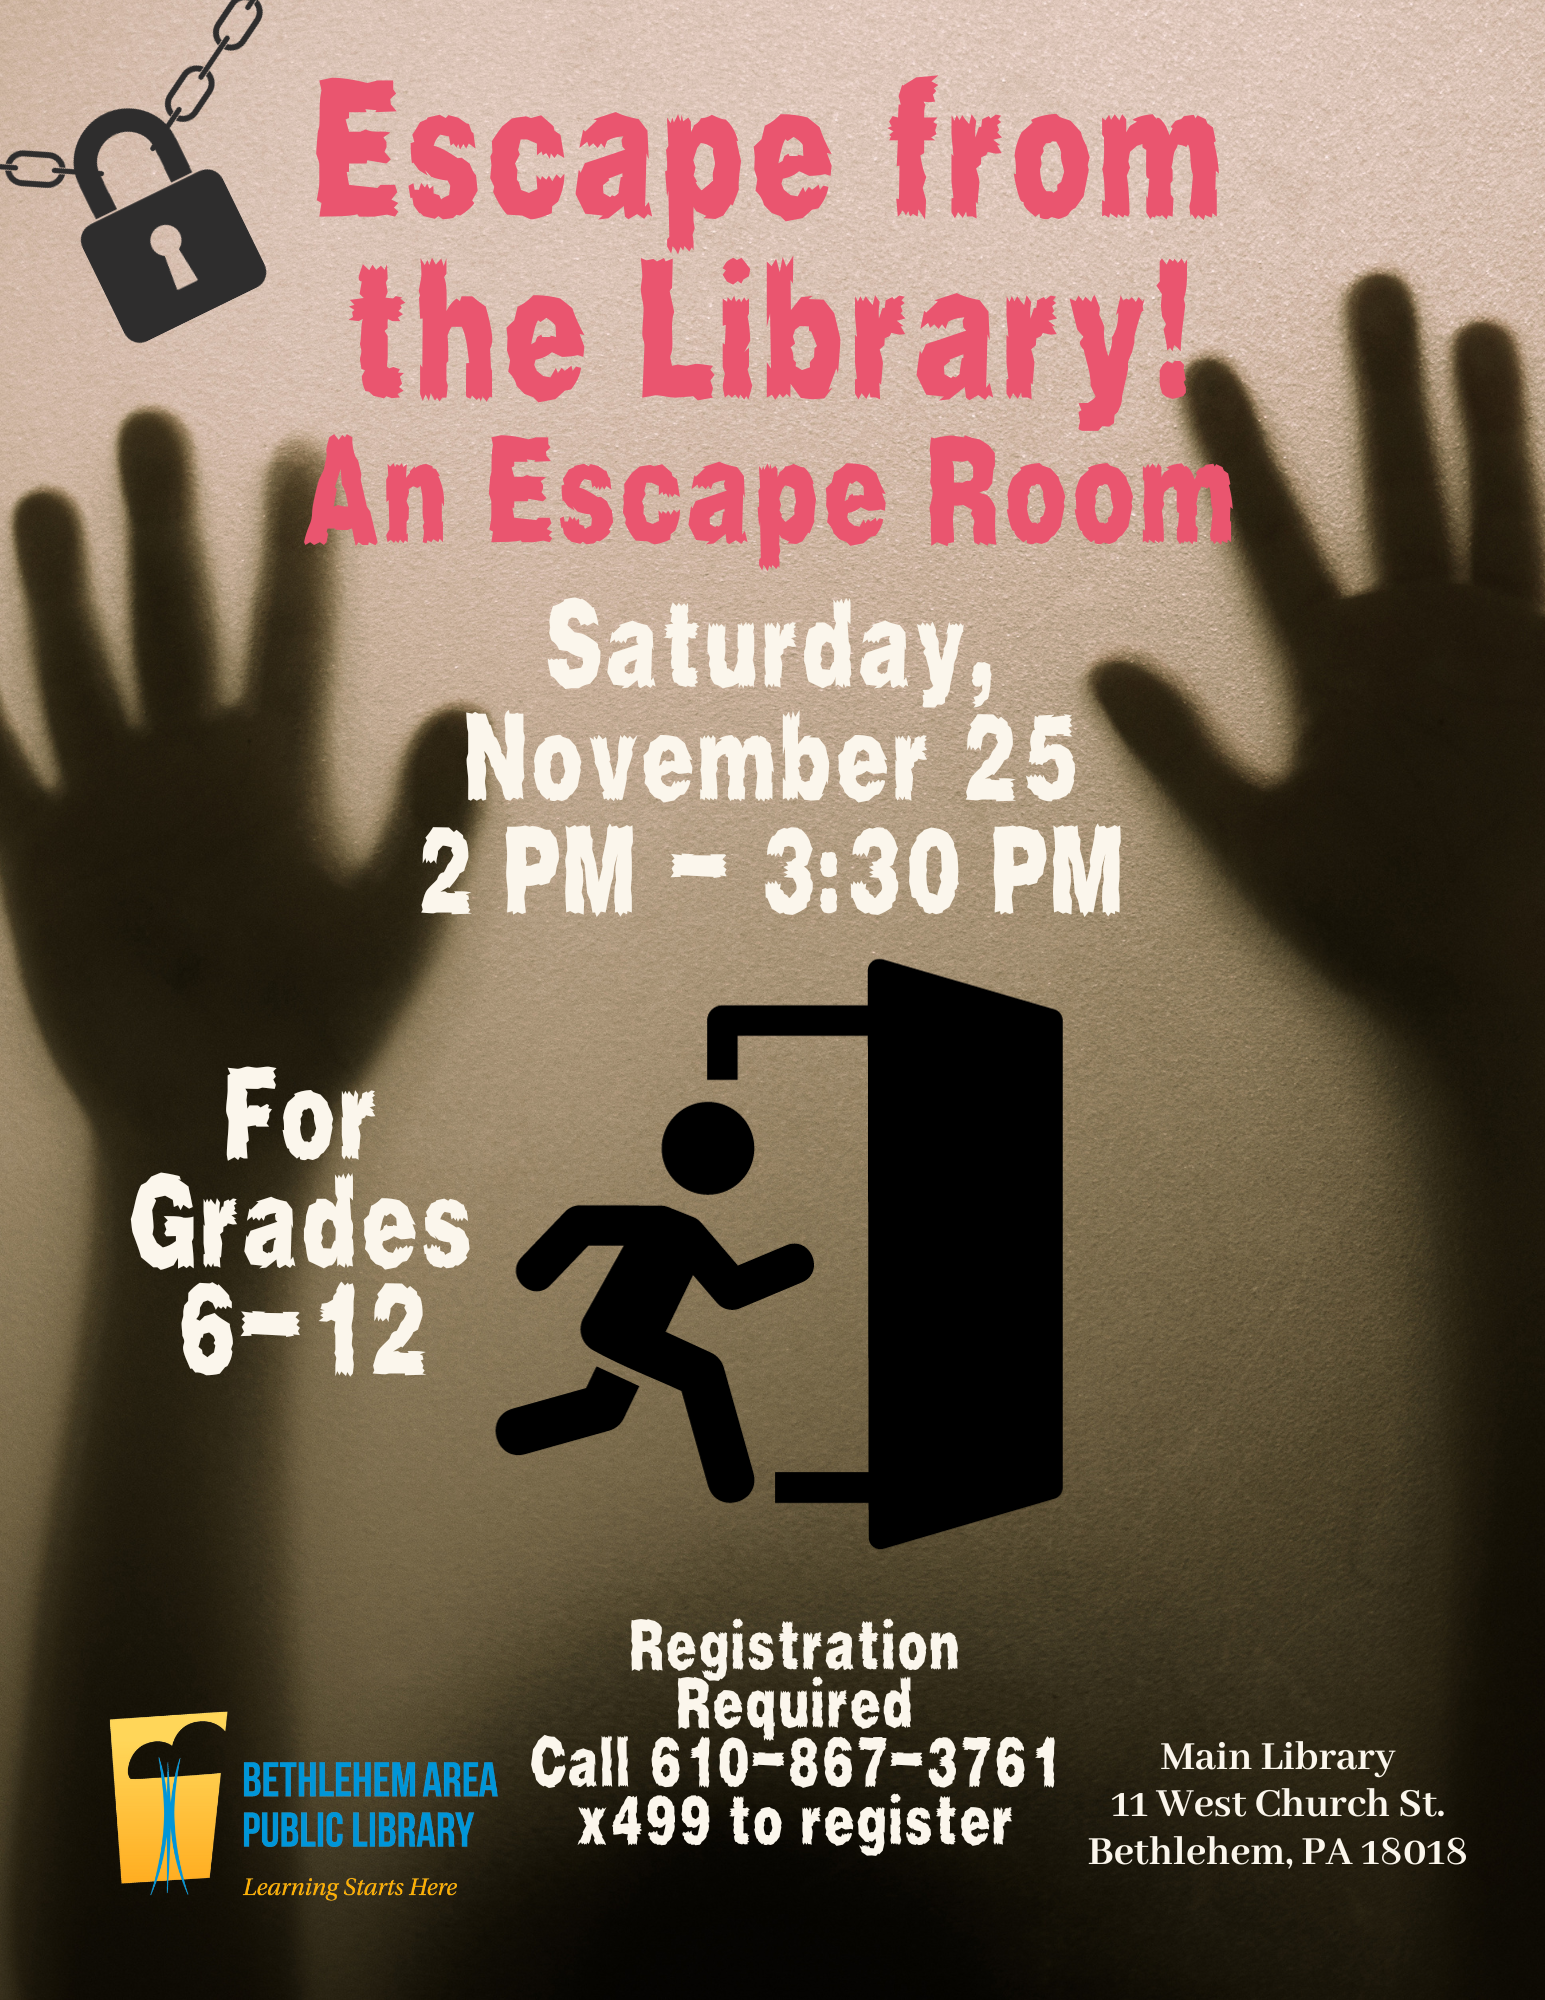 Escape from the Library